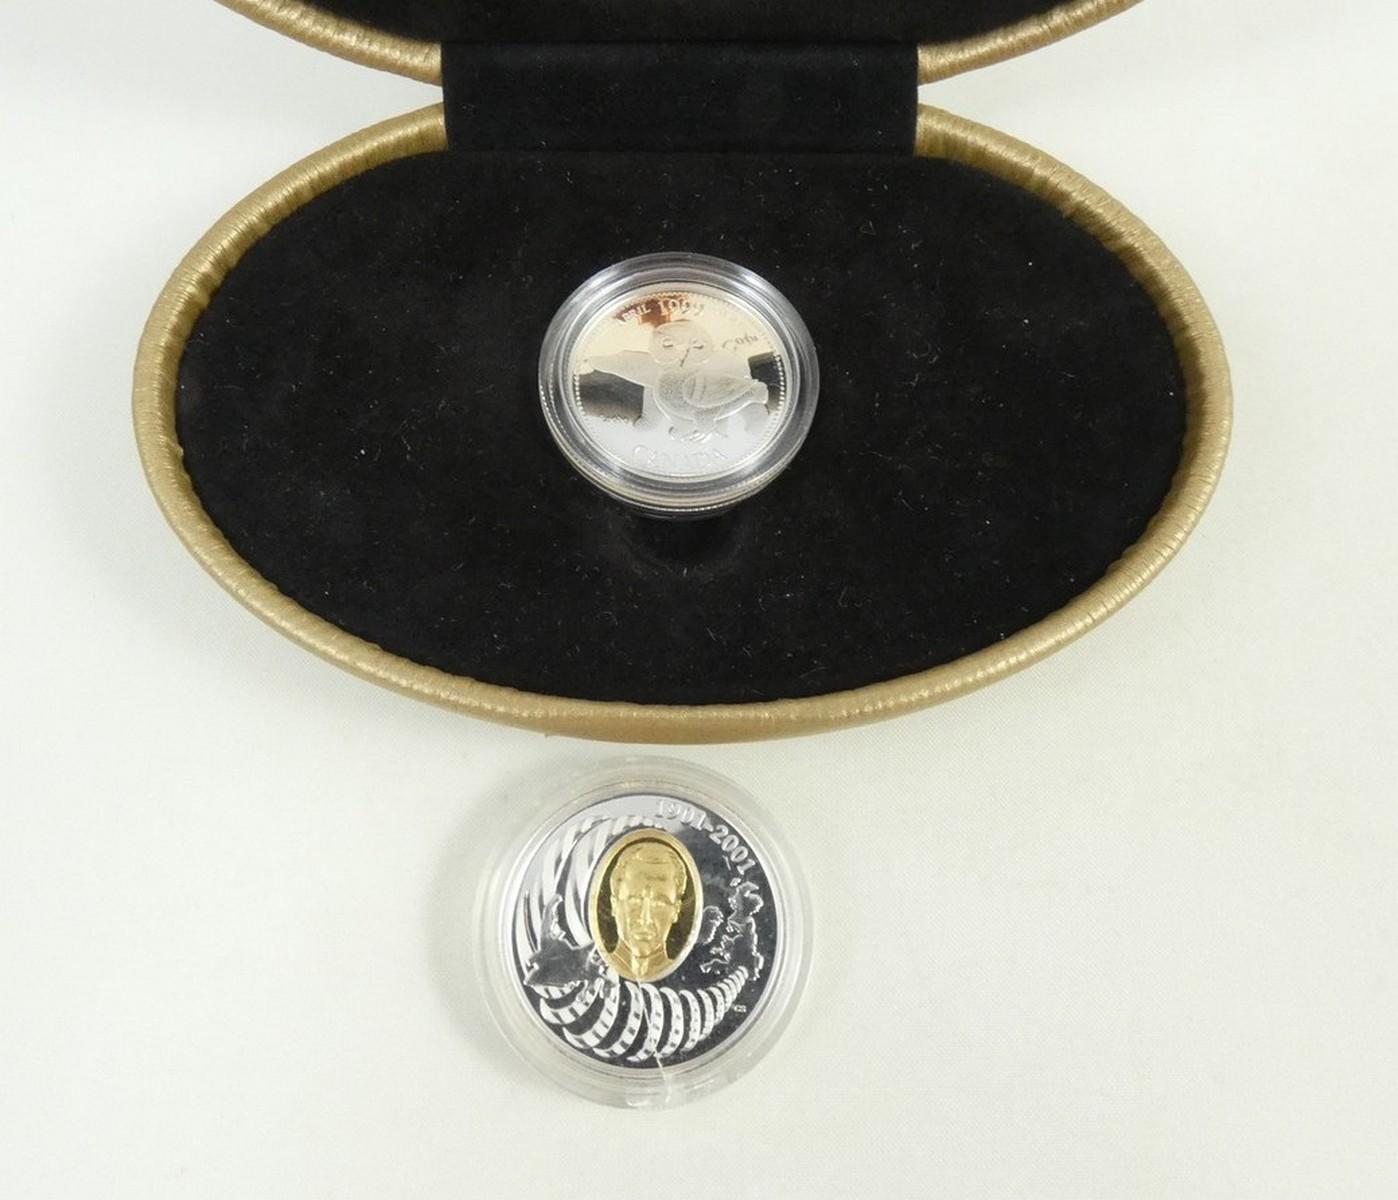 SILVER PROOF COINS